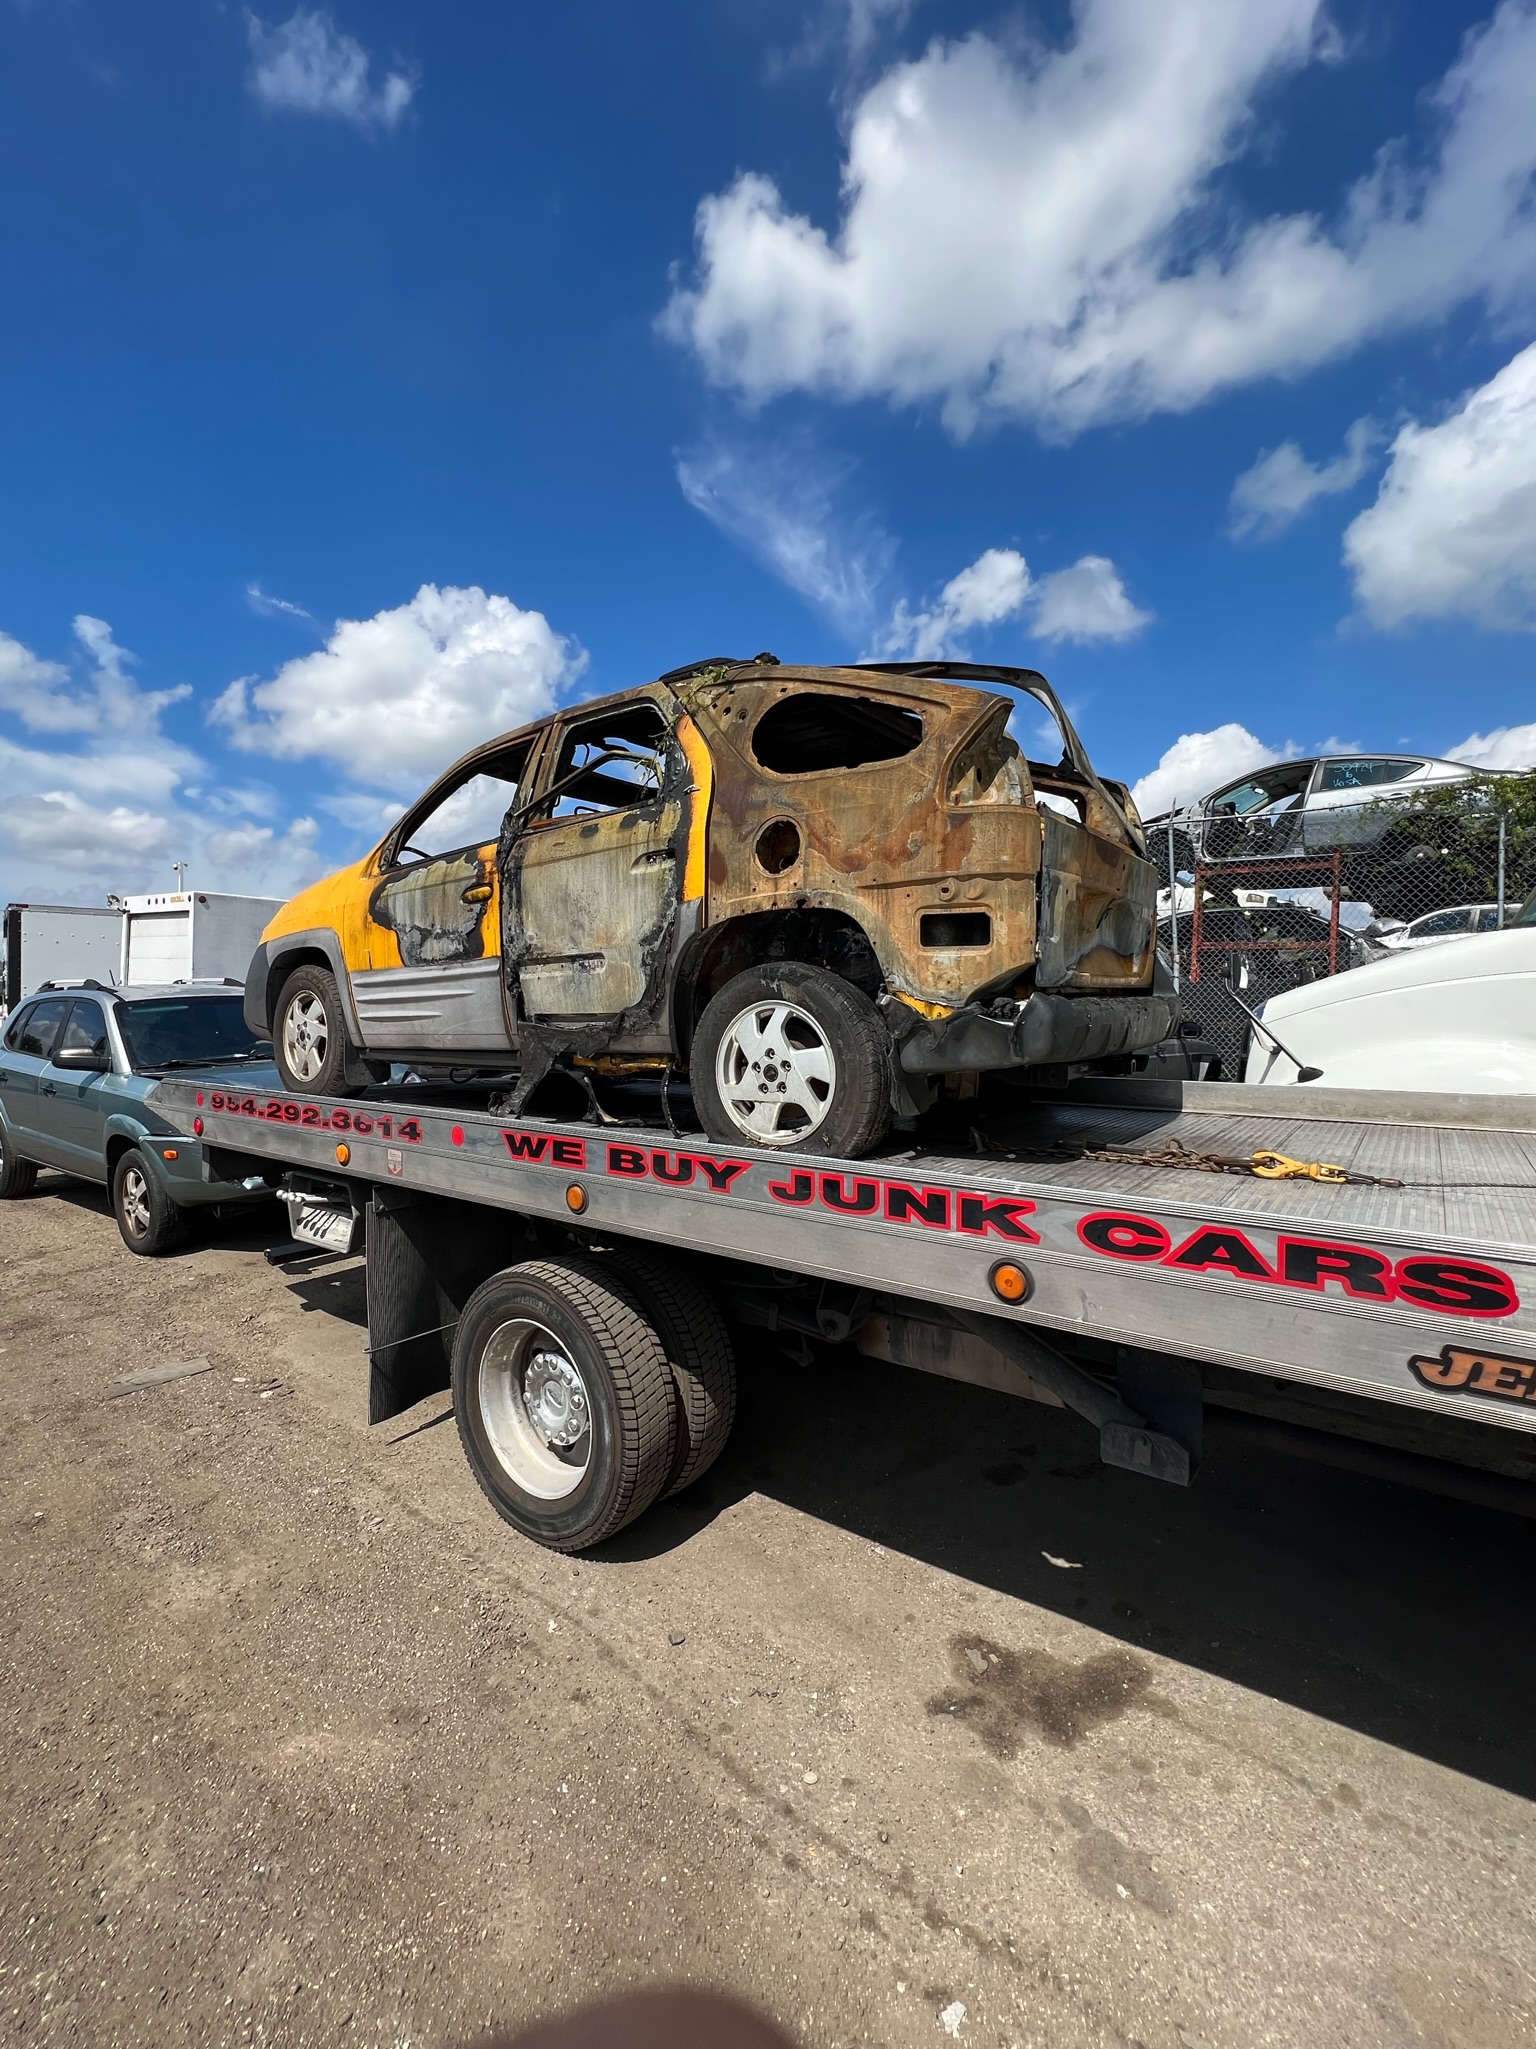 Cash for junk cars in South Florida